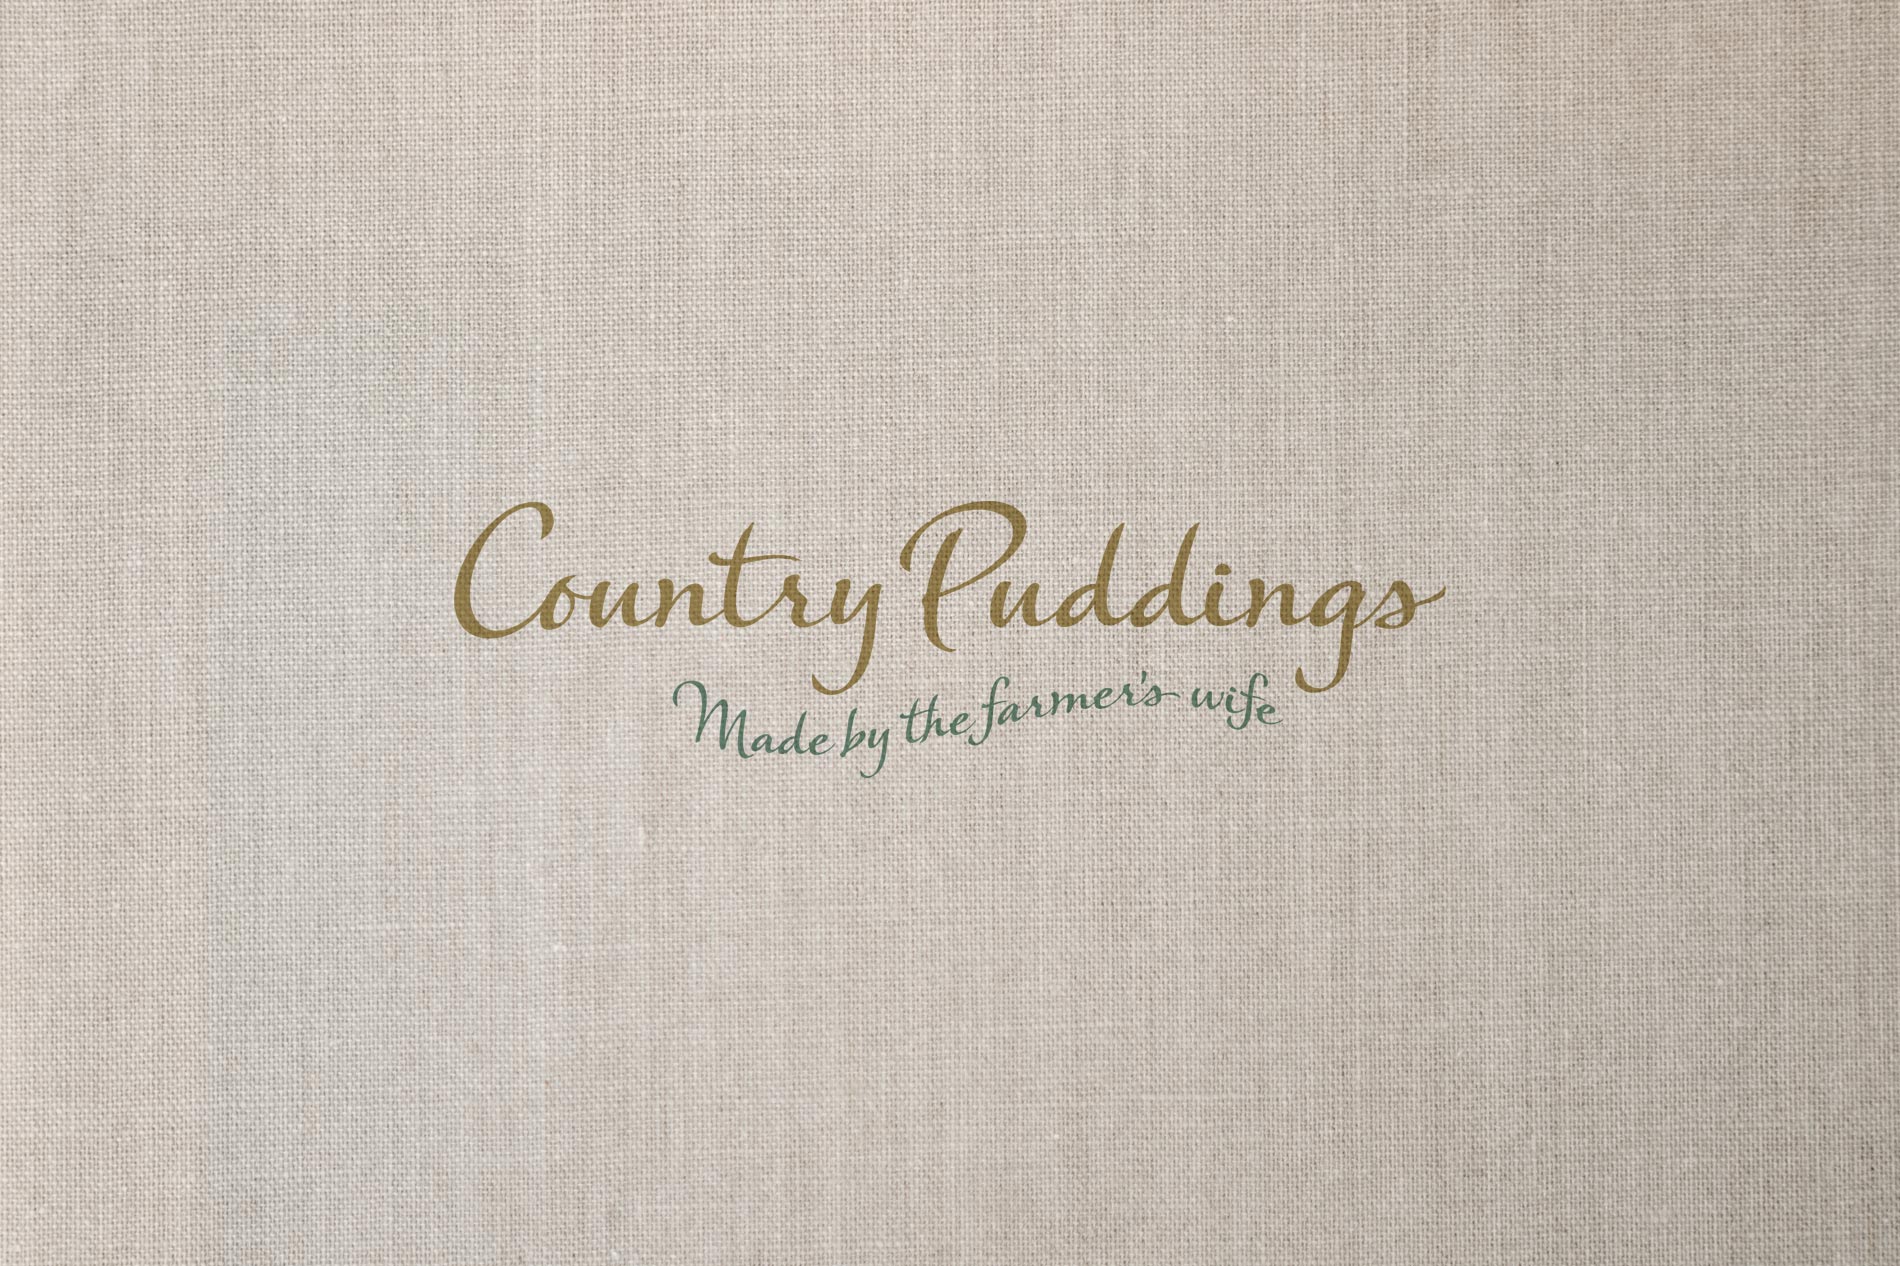 Country Puddings Logo, branding and packaging design, Penrith